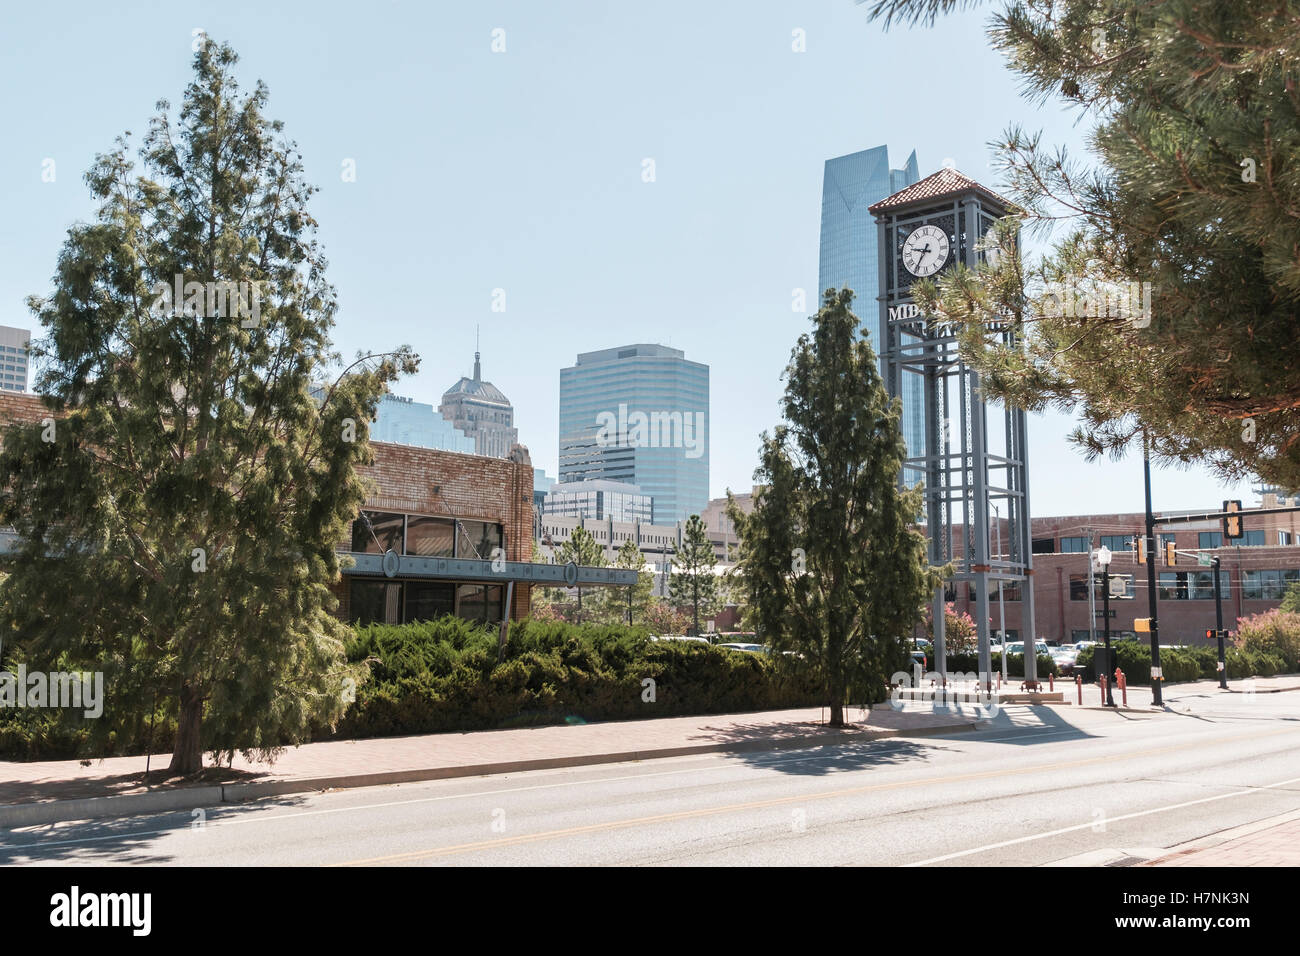 A view of the Midtown clock tower and partial skyline from N. Walker in Oklahoma City, Oklahoma, USA. Stock Photo